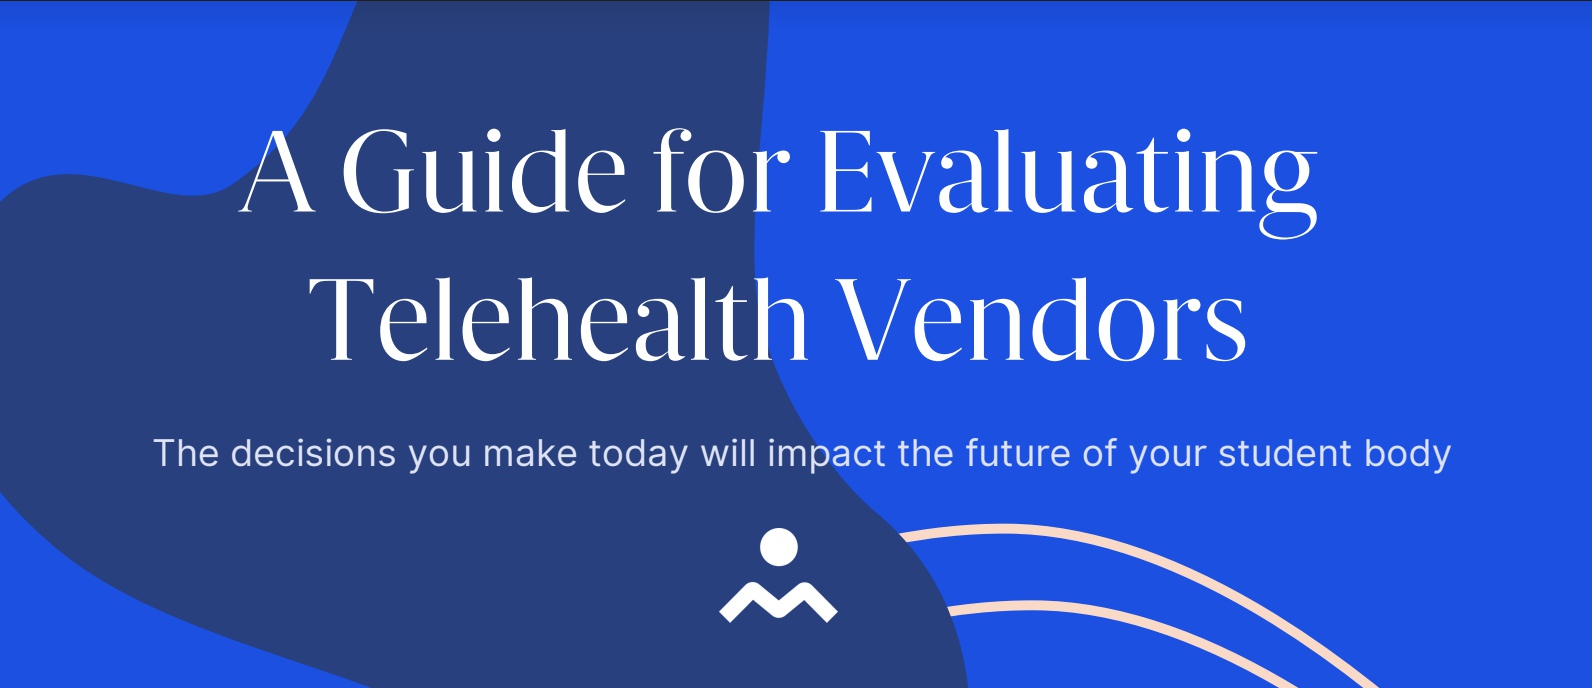 A Guide for Evaluating Telehealth Vendors